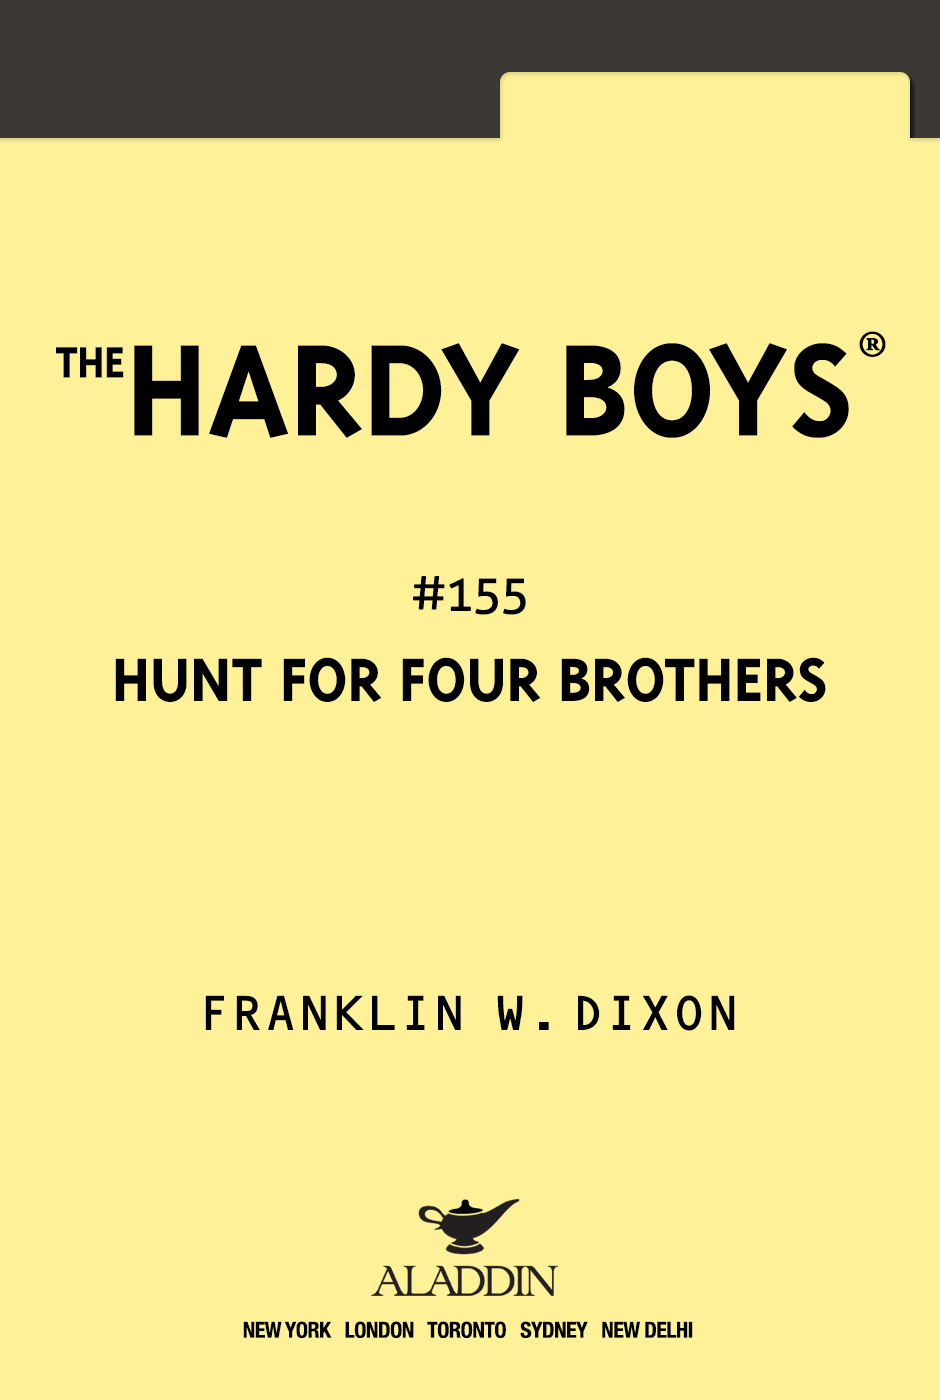 The Hunt for Four Brothers